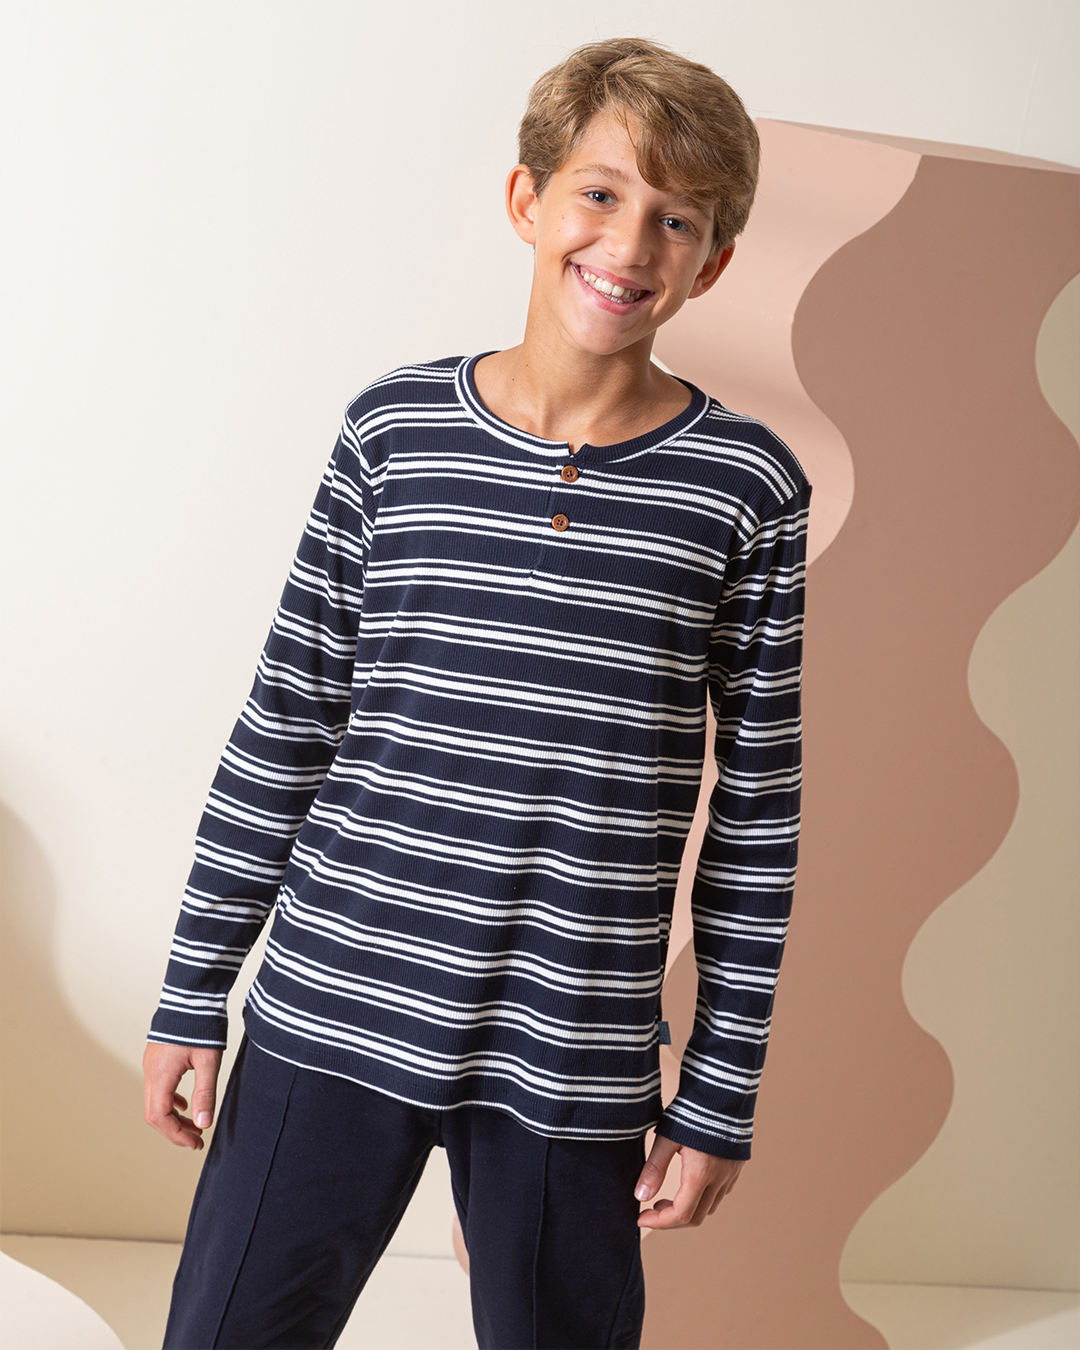 Long-sleeved Ribbed Cotton shirts with a button placket.